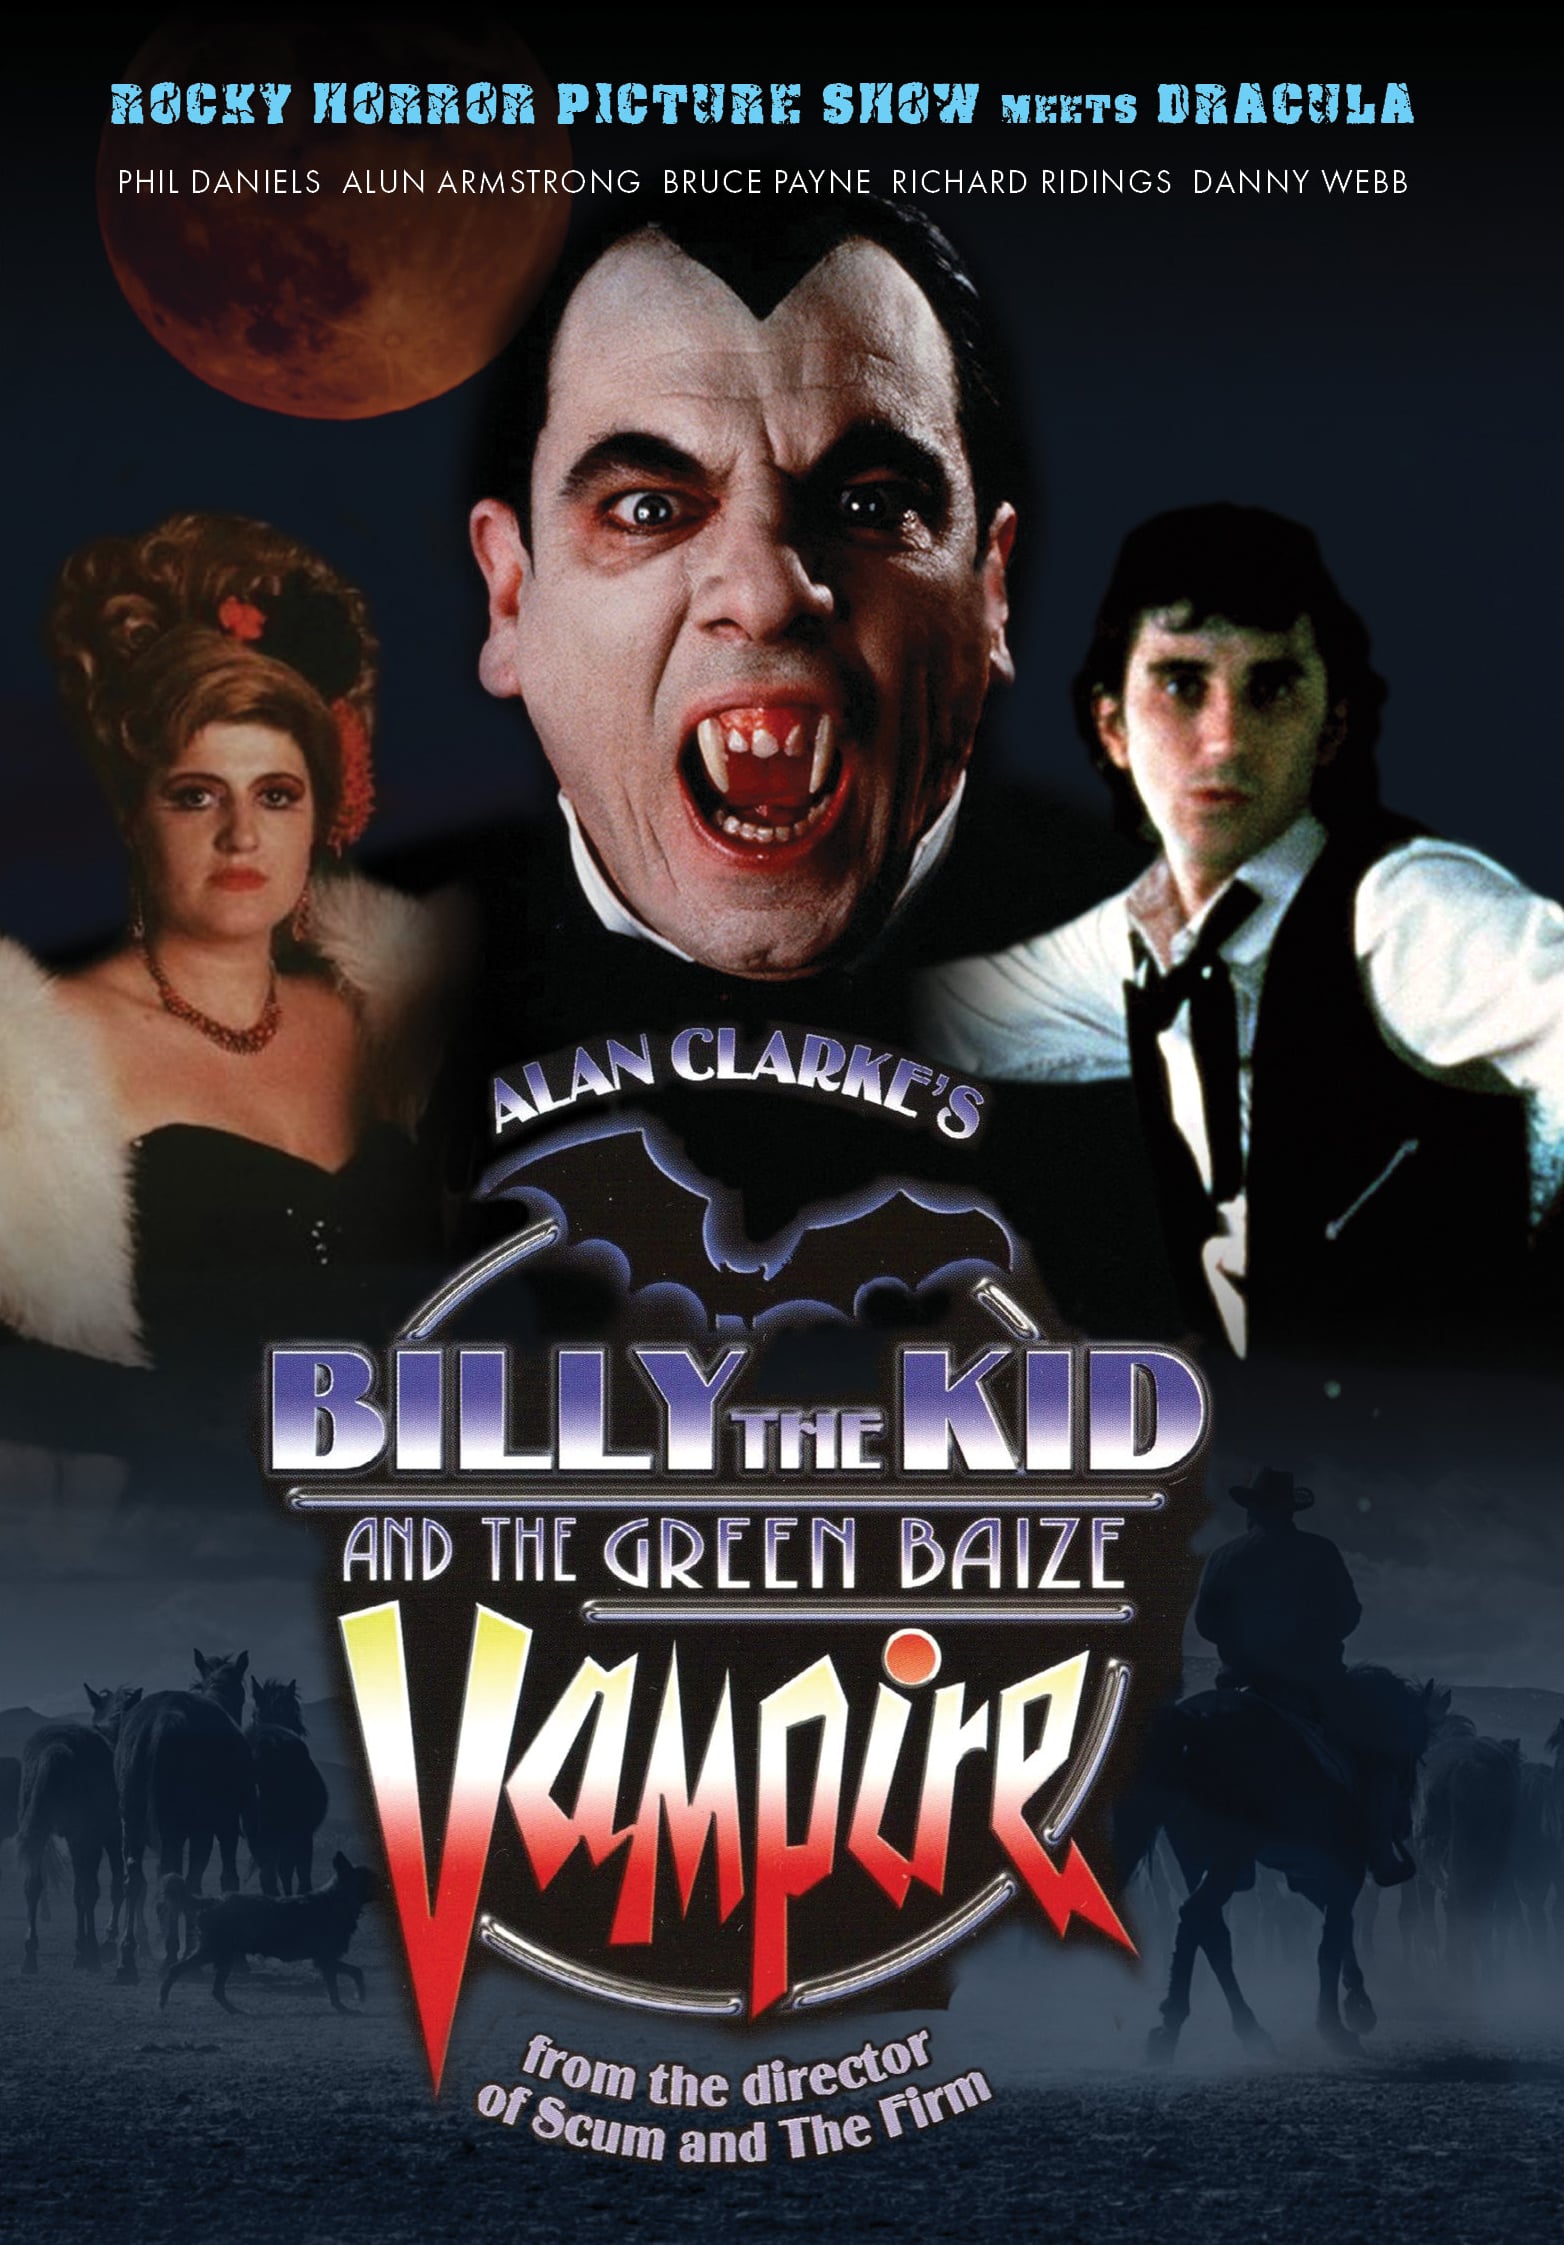 Caratula de BILLY THE KID AND THE GREEN BAIZE VAMPIRE (Billy the kid and the green baize vampire) 